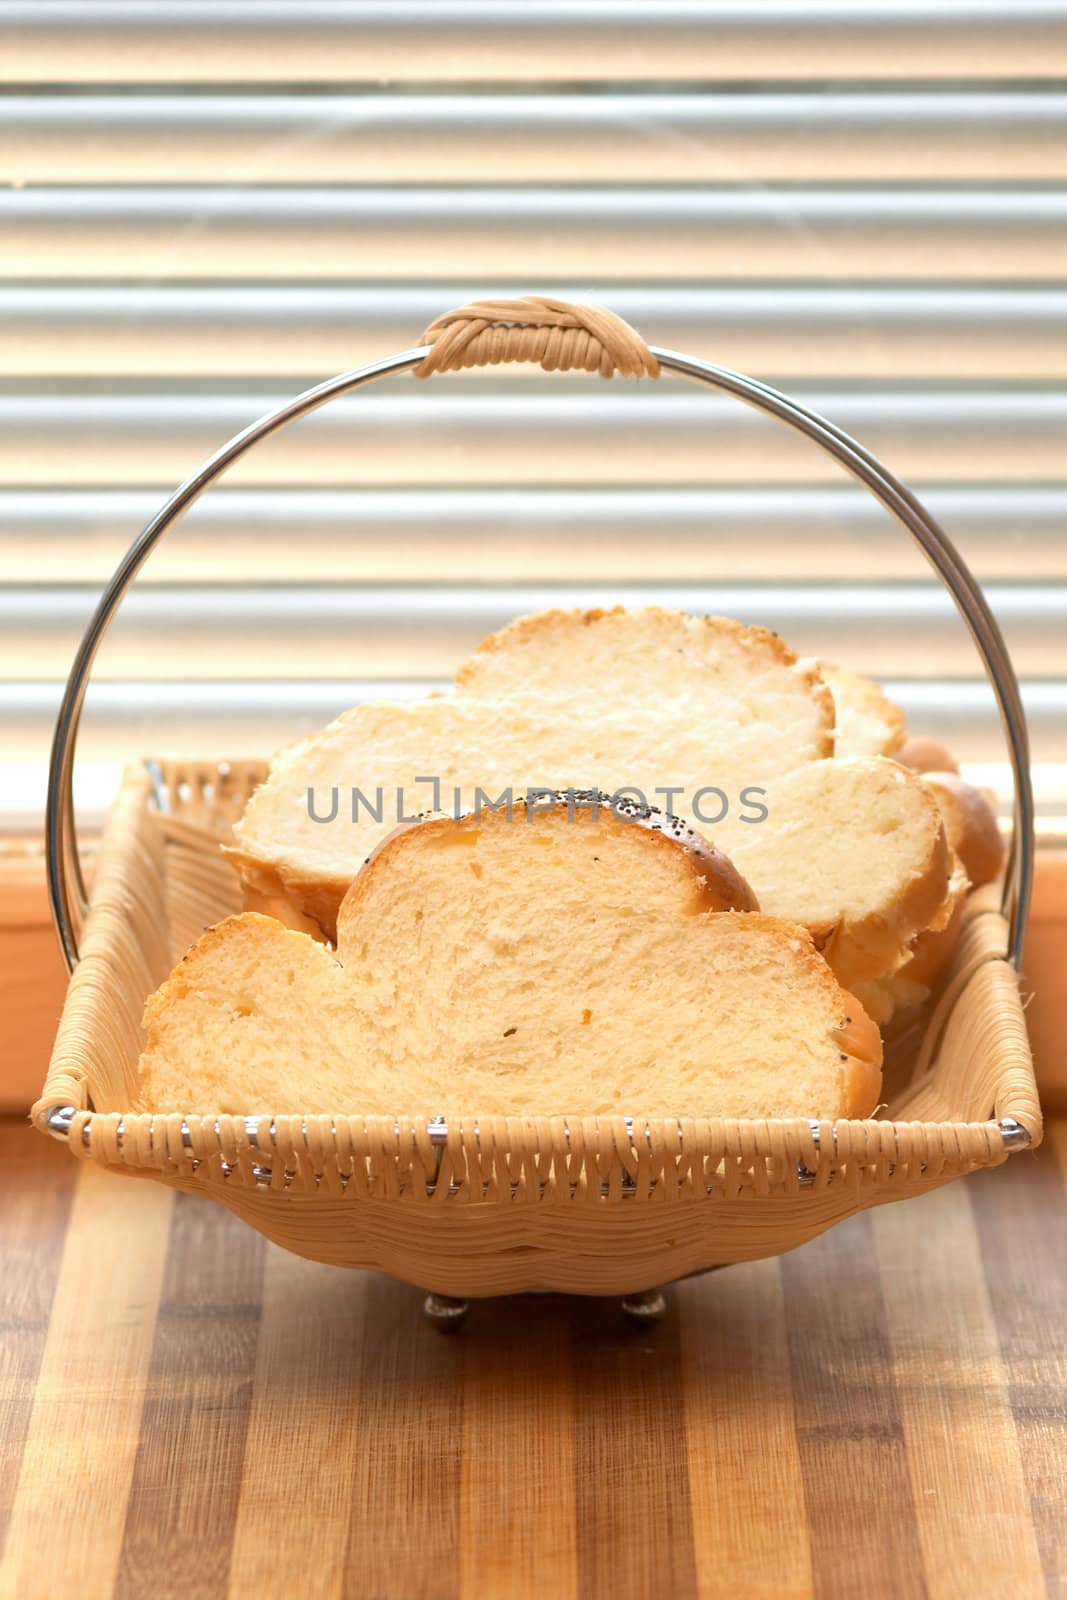 An image of bread in tray